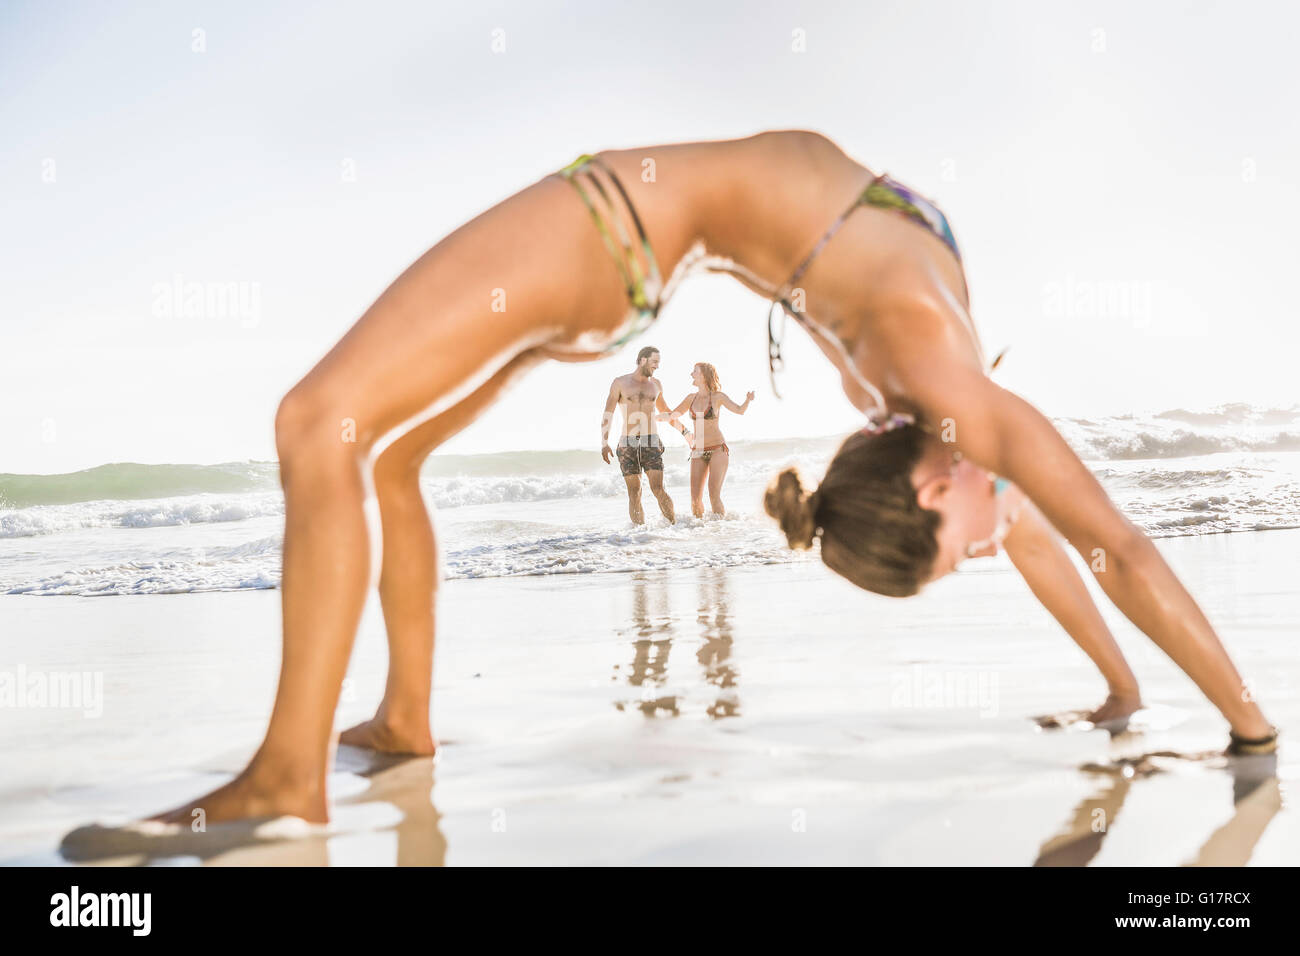 Mid adult woman wearing bikini bending over backwards on beach, Cape Town,  South Africa Stock Photo - Alamy